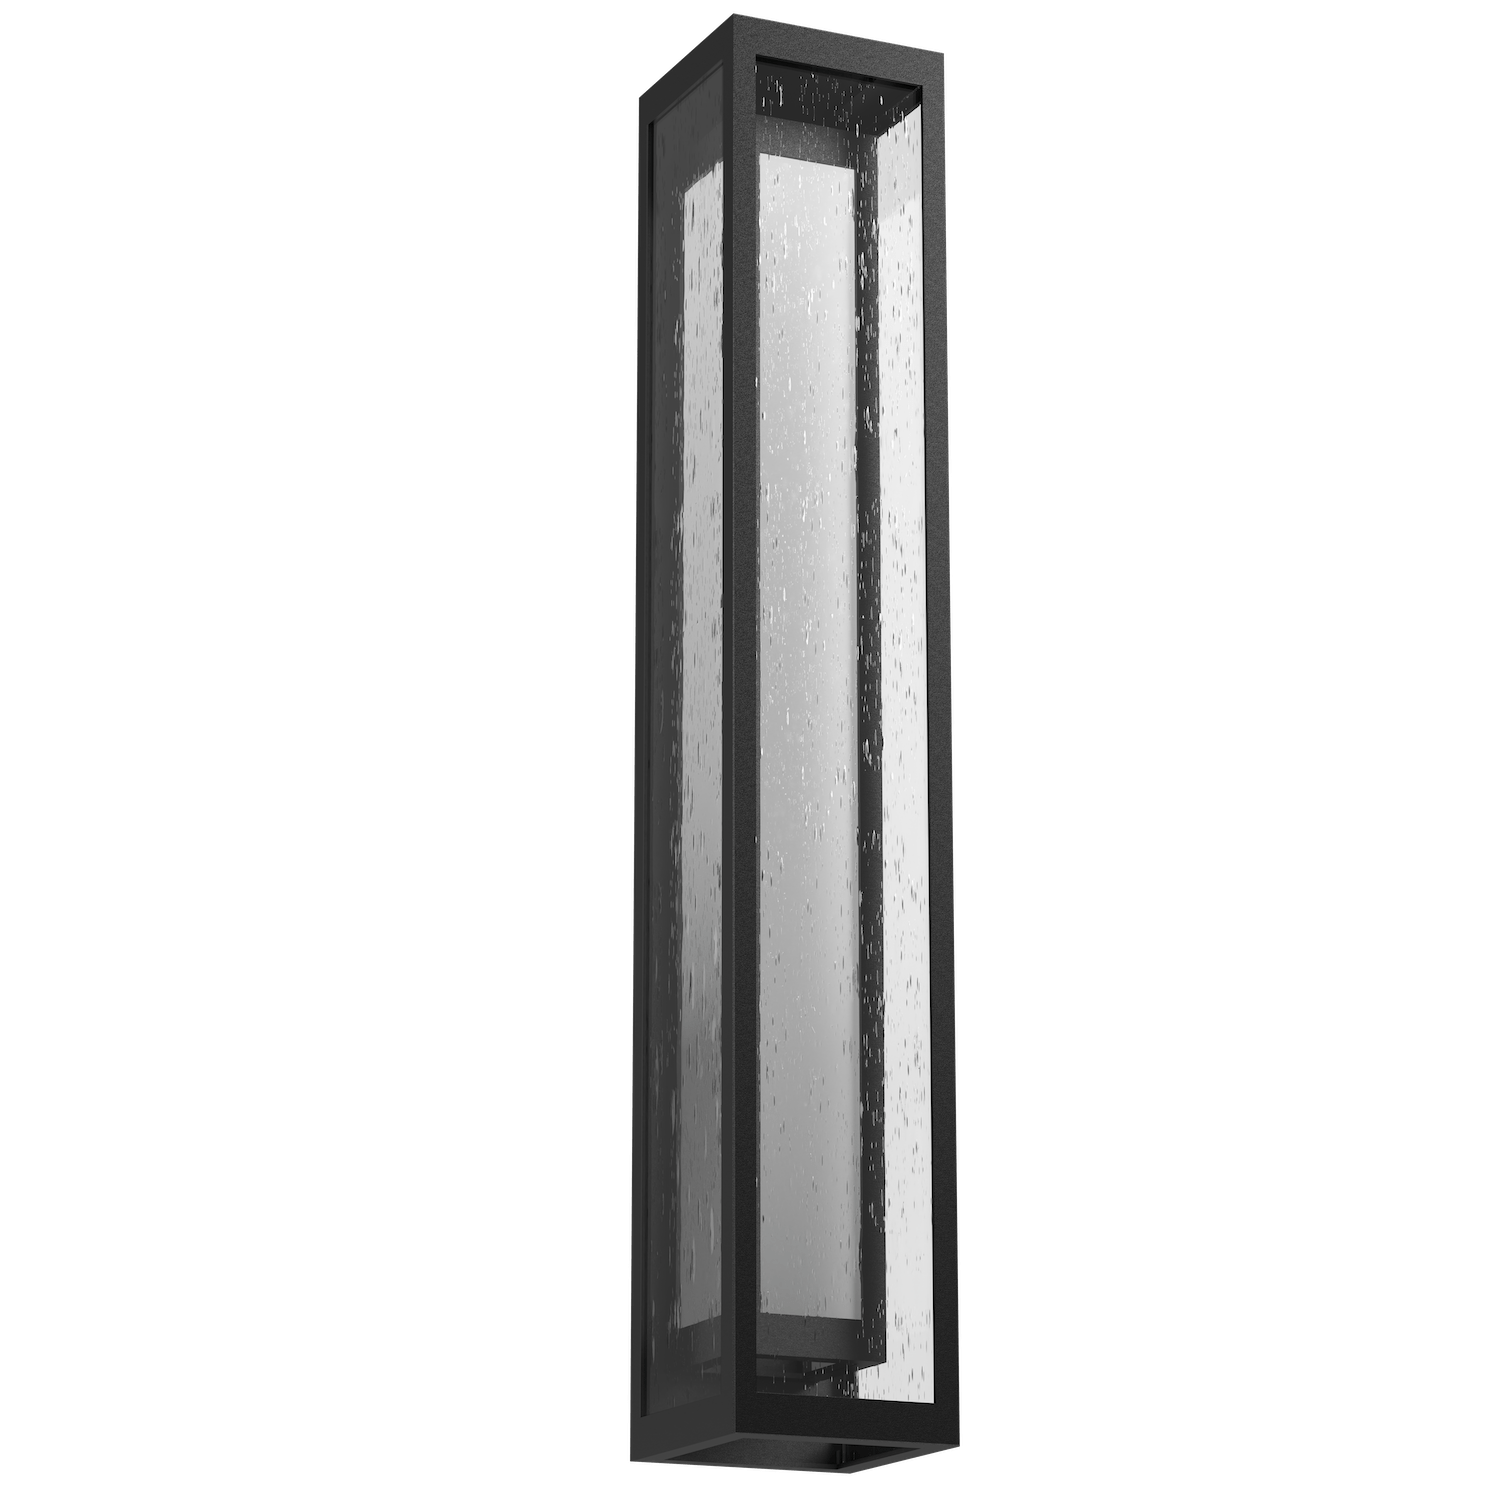 ODB0027-36-TB-F-Hammerton-Studio-Double-Box-36-inch-outdoor-sconce-with-textured-black-finish-and-frosted-glass-shade-and-LED-lamping